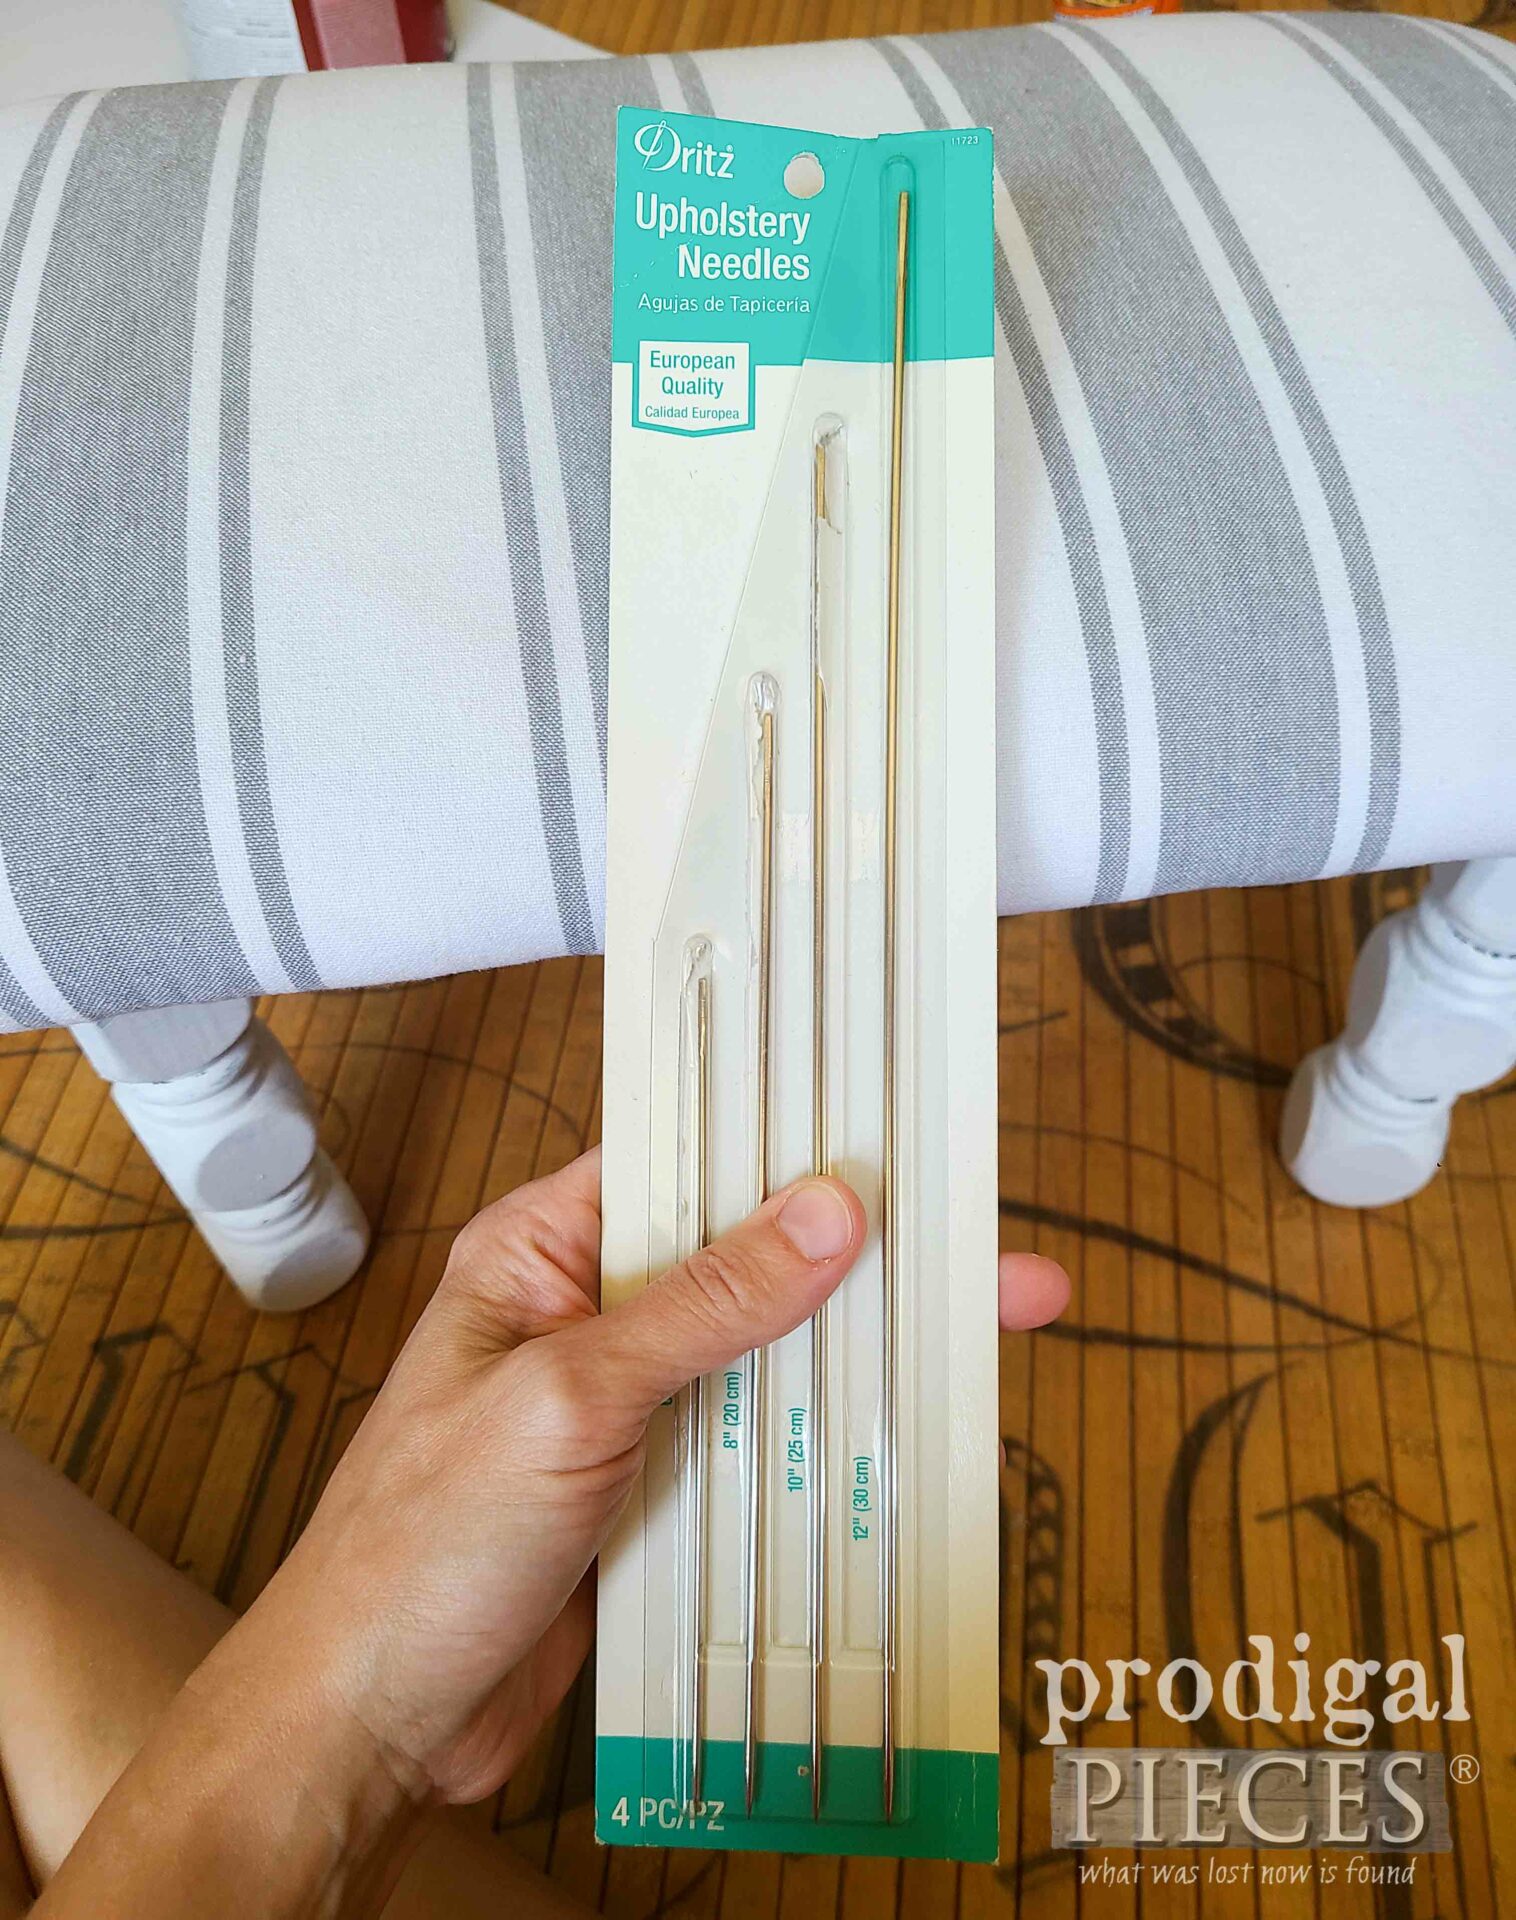 Upholstery Needle Pack for Wooden Footstool Button Tufting | prodigalpieces.com #prodigalpieces